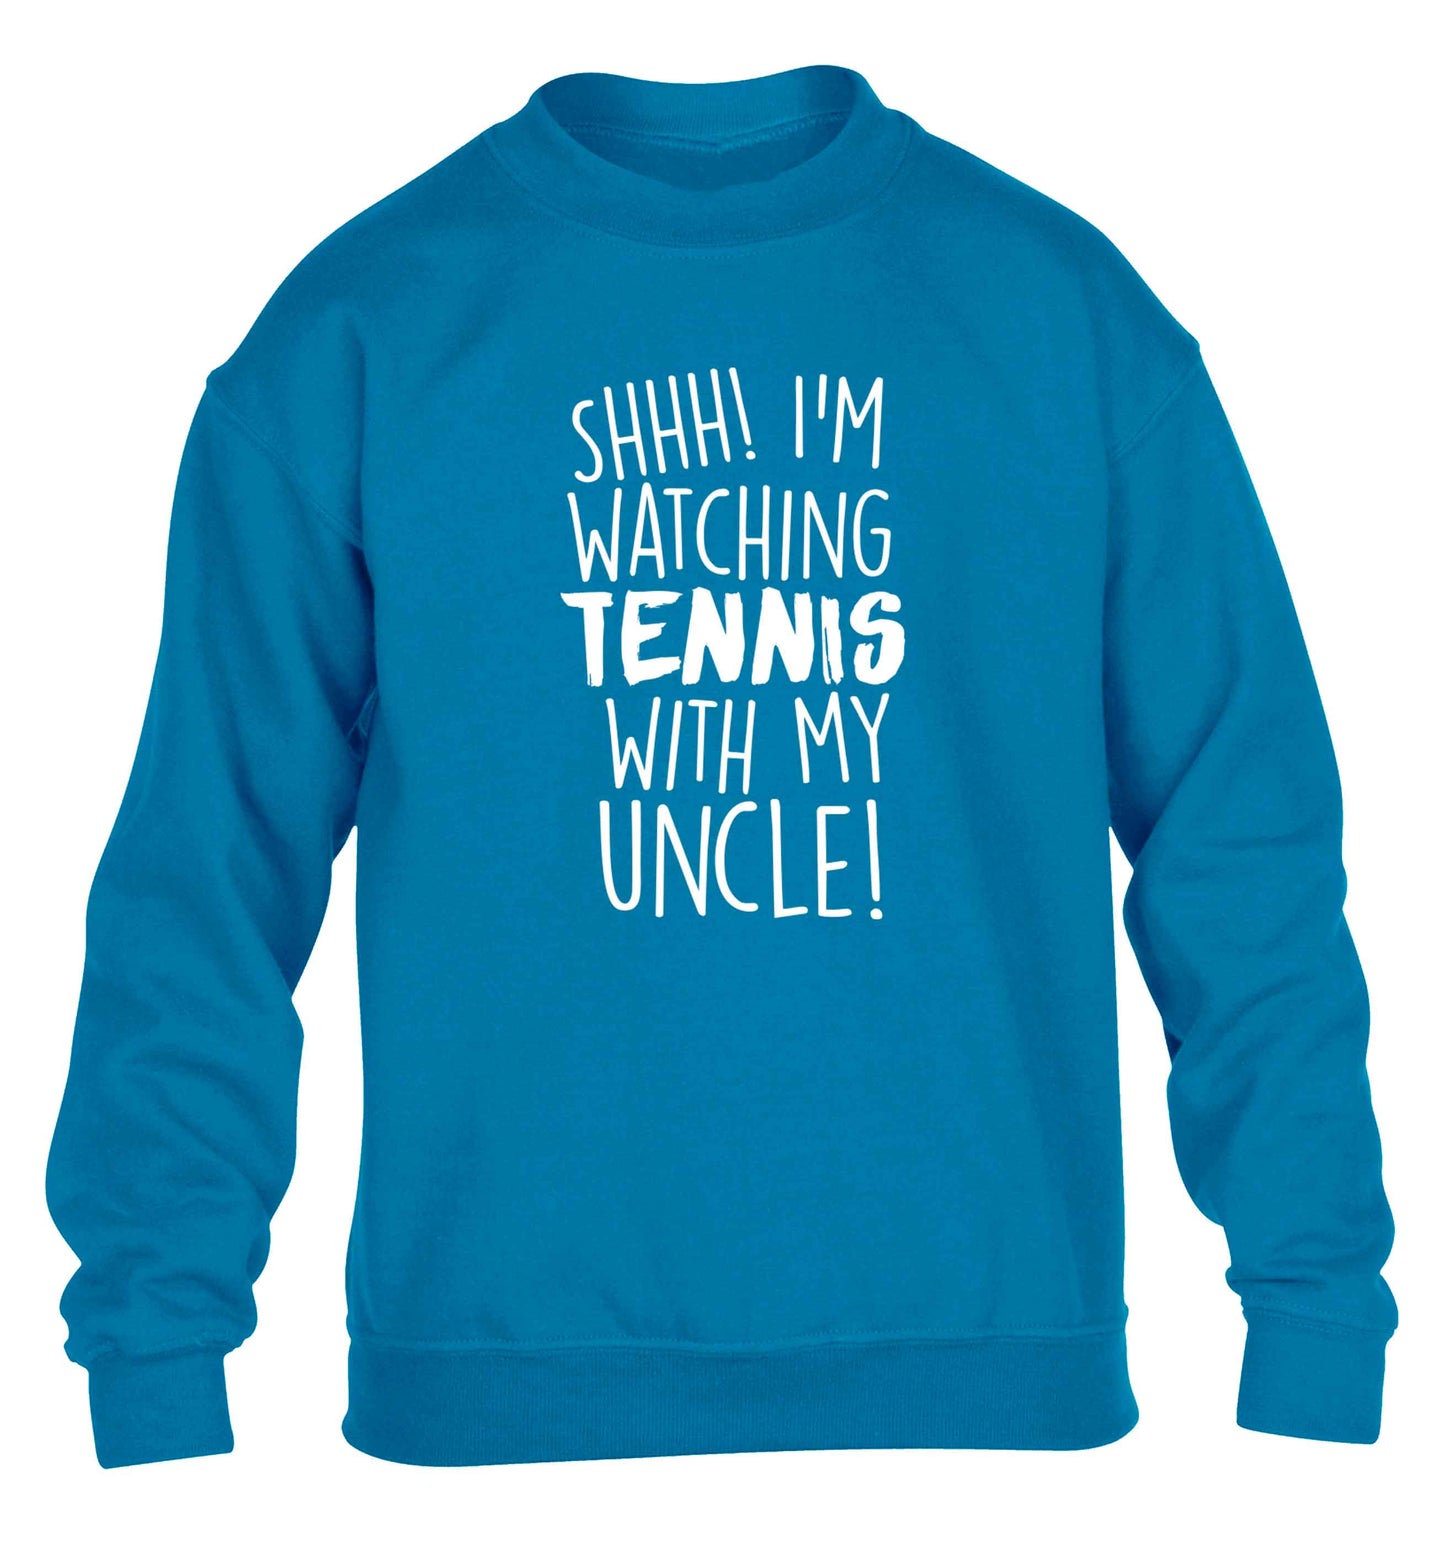 Shh! I'm watching tennis with my uncle! children's blue sweater 12-13 Years